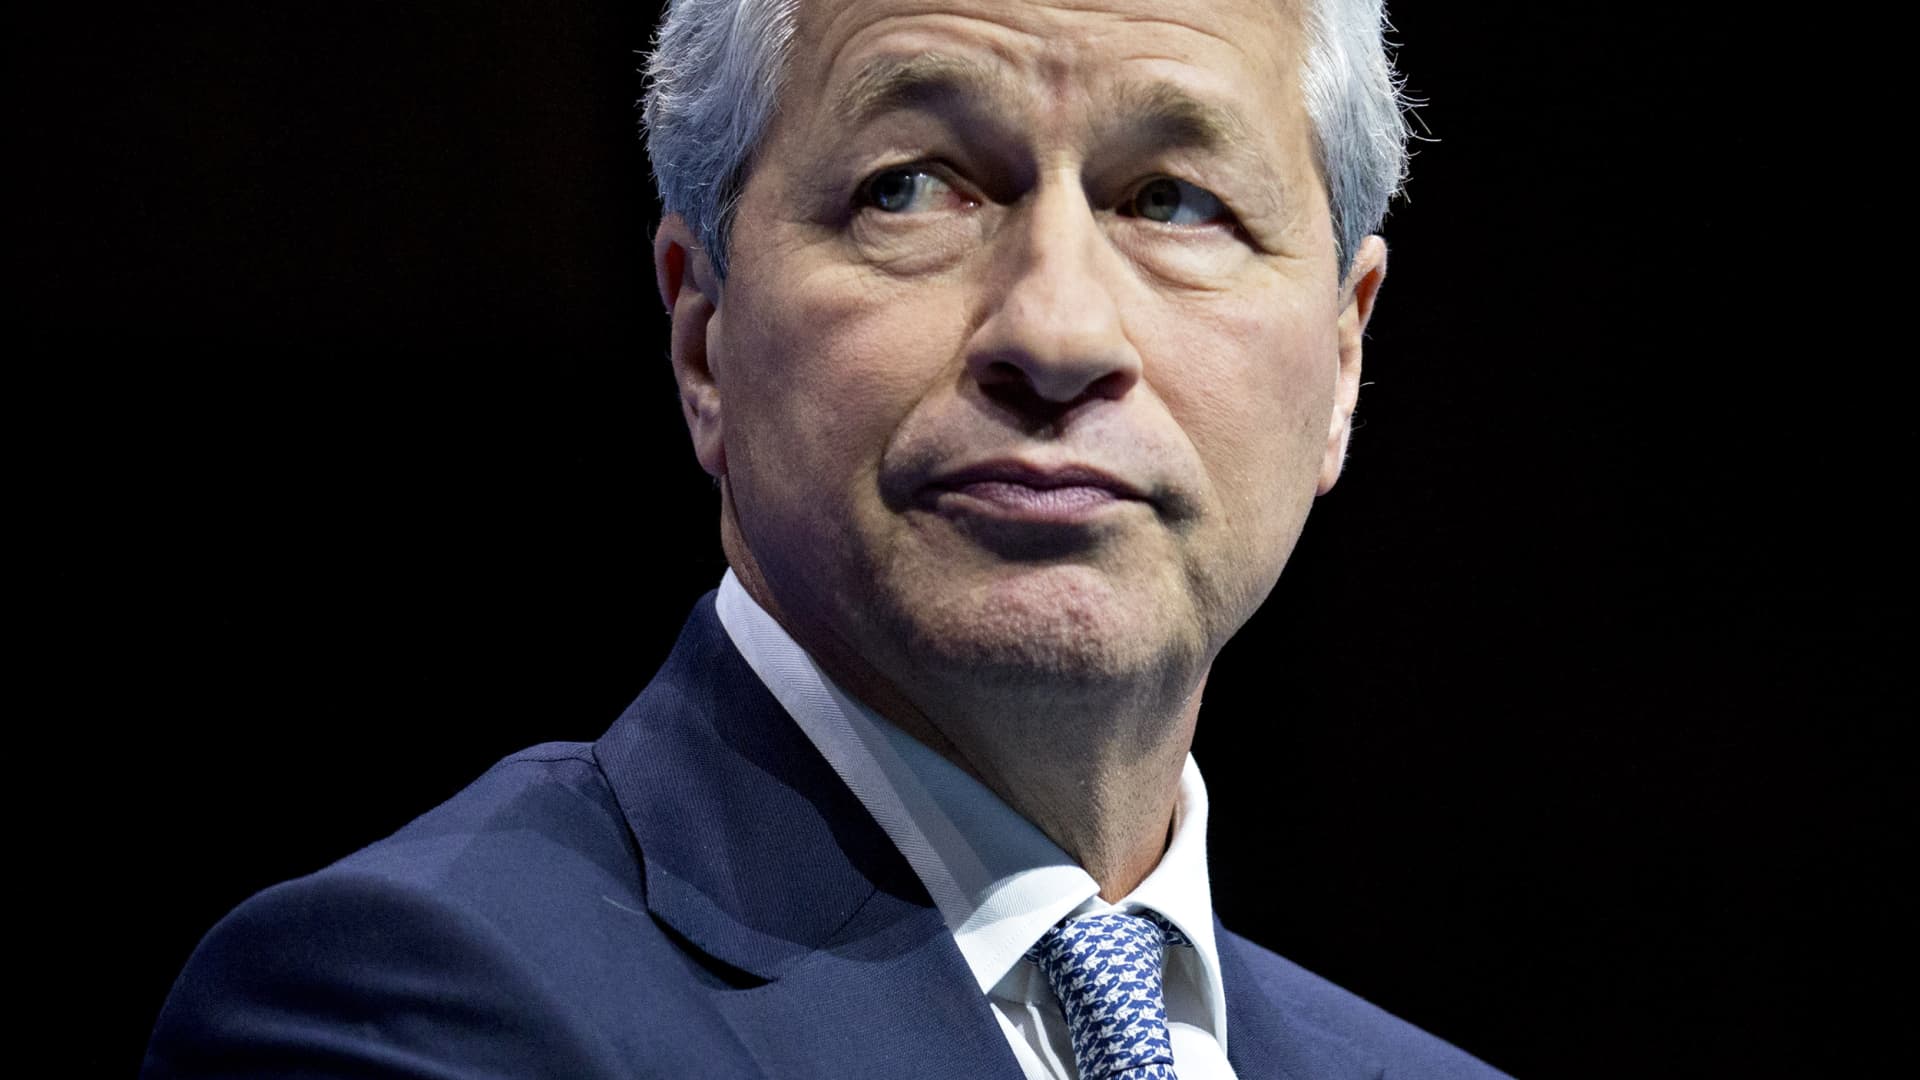 Jamie Dimon sees ‘storm clouds’ ahead for U.S. economy later this year – CNBC